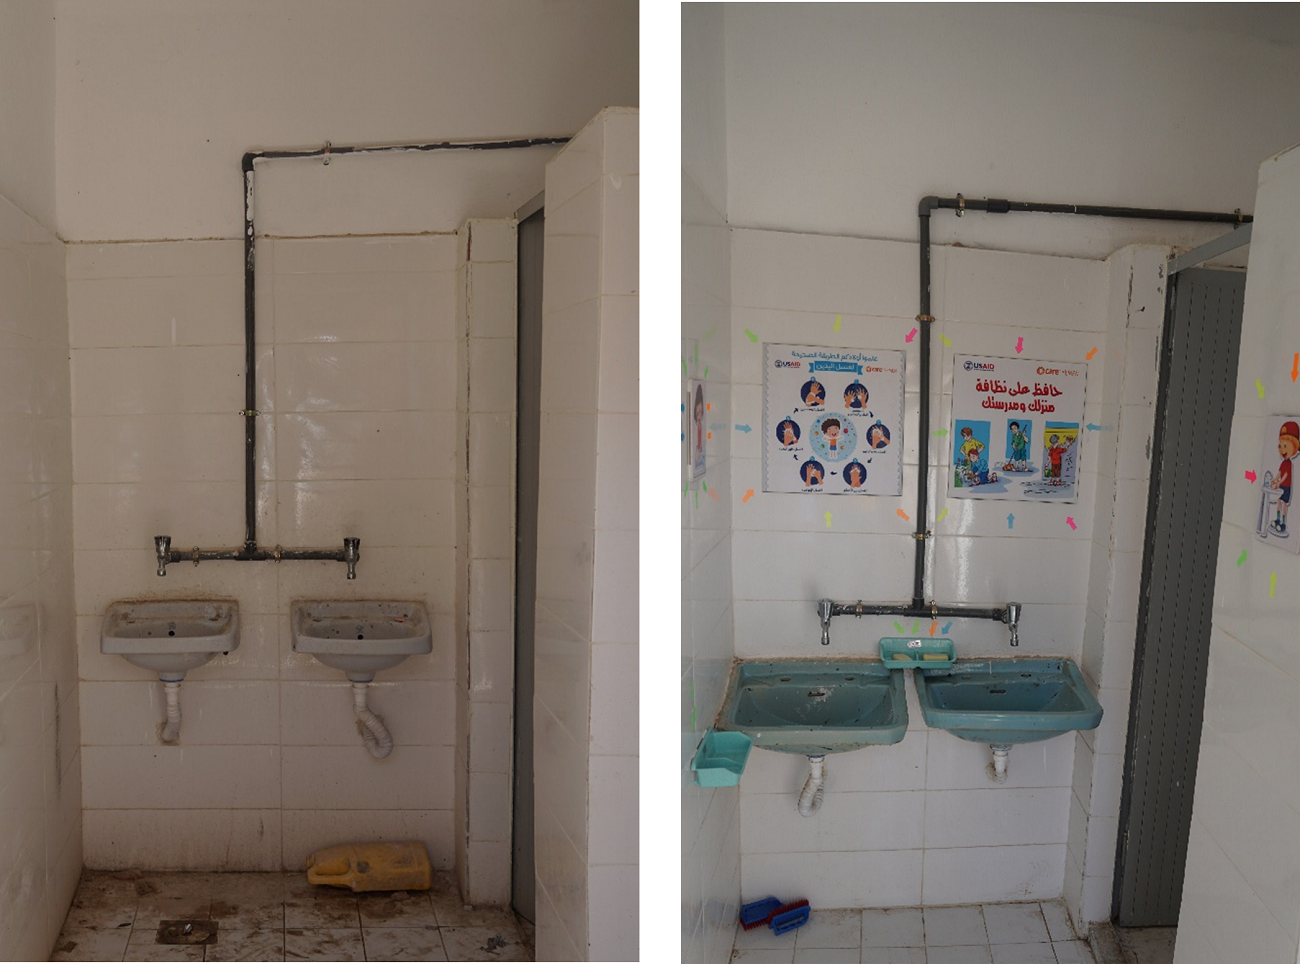 Before and after pictures of a handwashing station